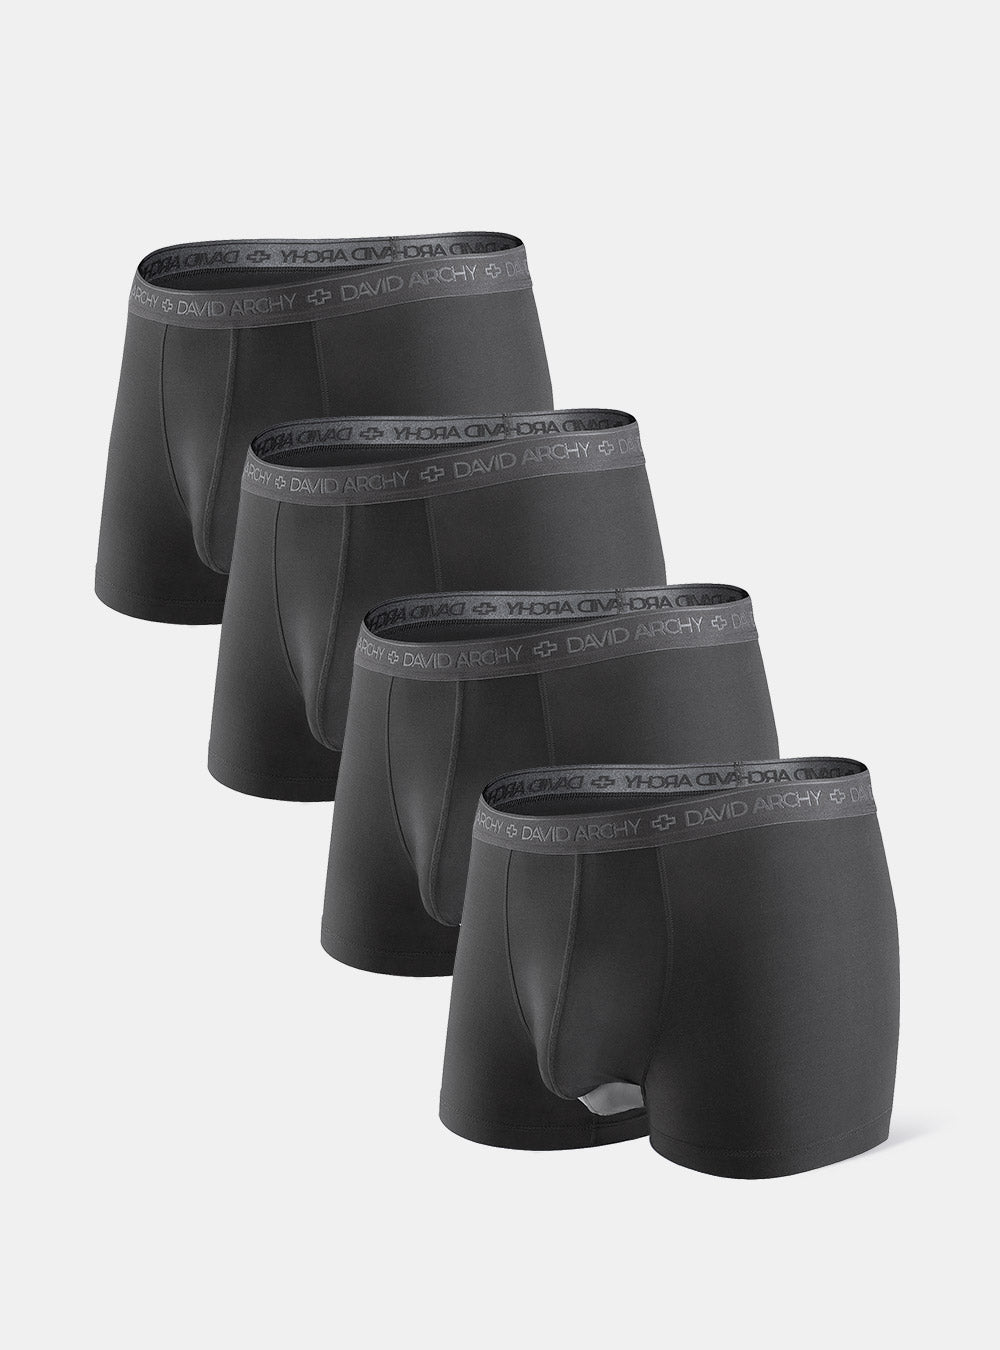 David Archy 4 Packs Trunks Separatec 3D Pouch Micro Modal Dual